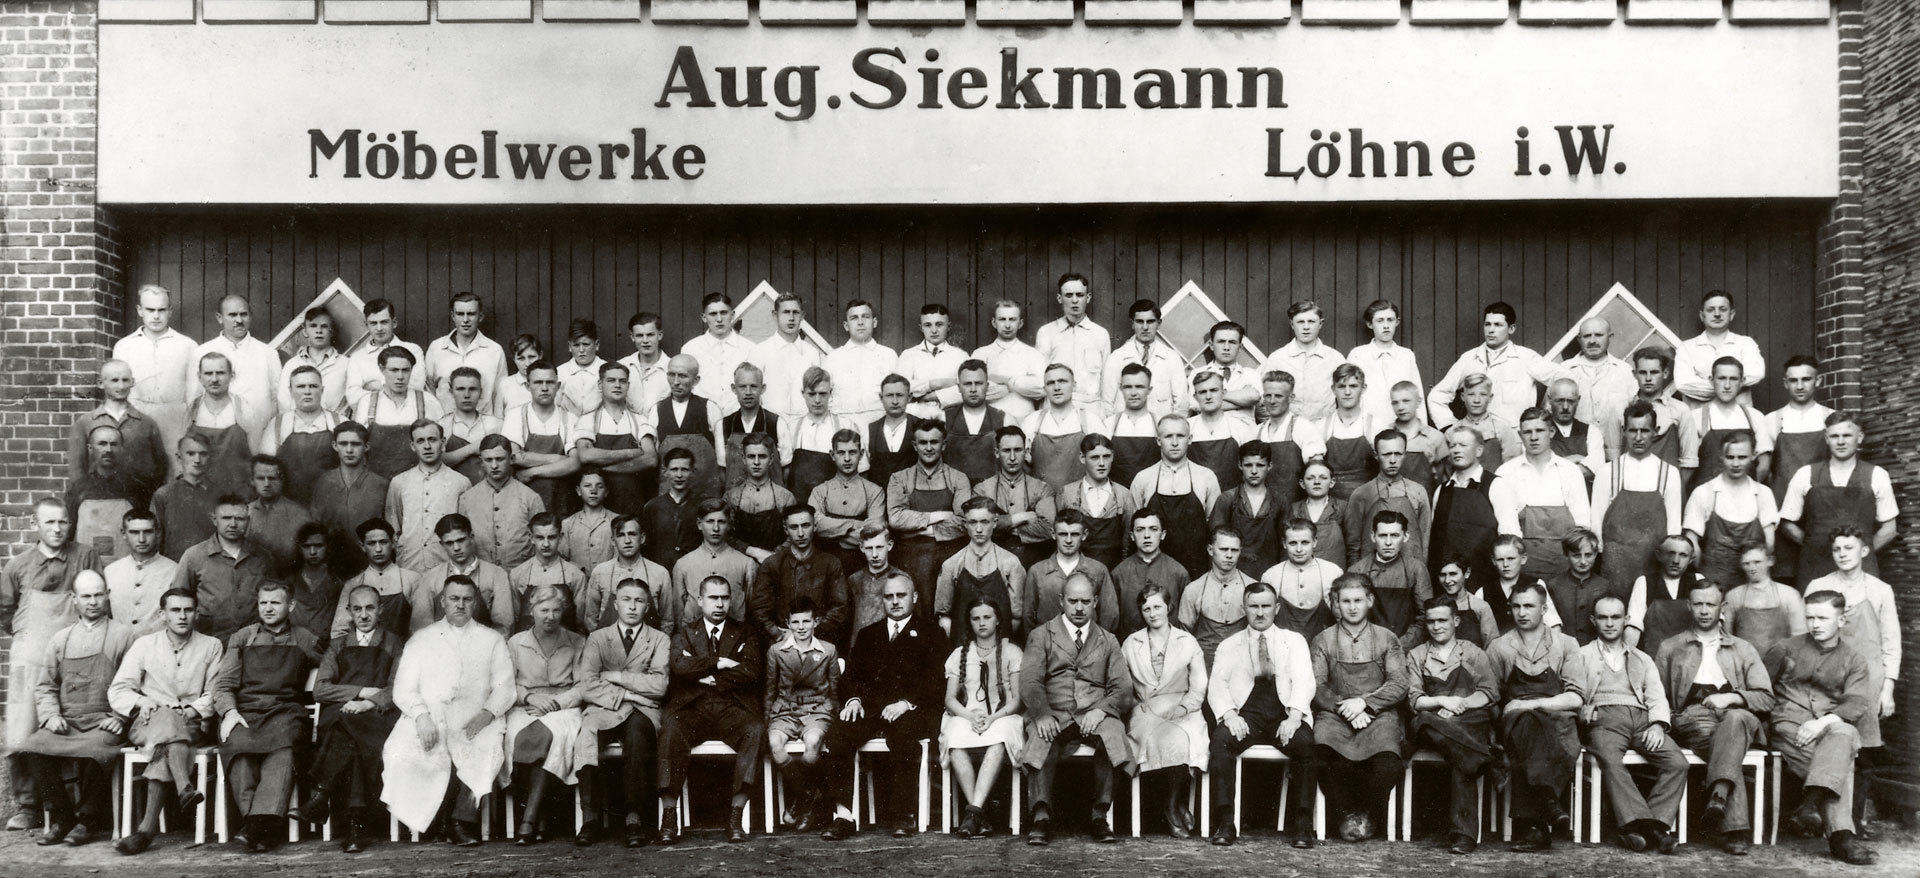 SieMatic family: Photo of the first employees of August Siekmann M?belwerke in 1929